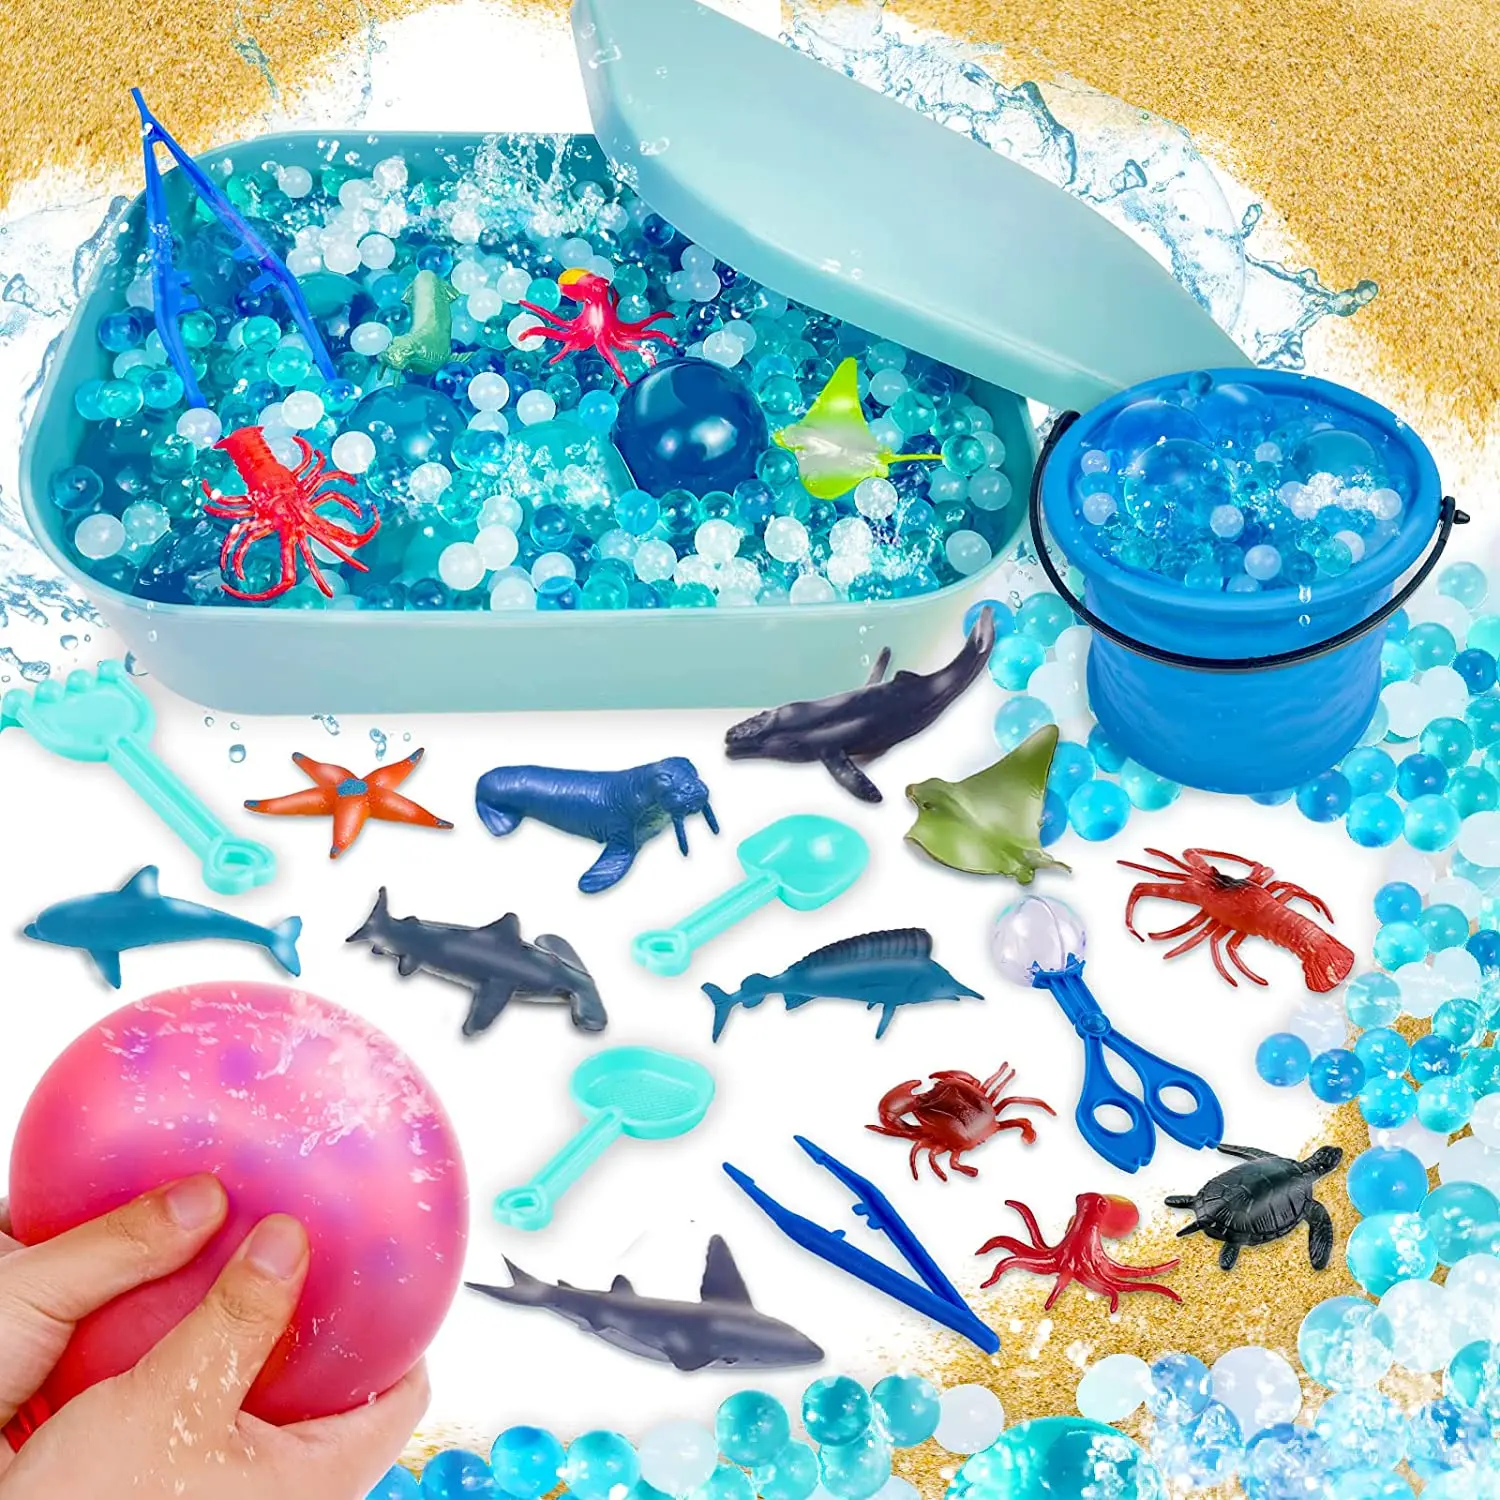 WEERHXAON Magic Water Elf Beads Toy Set with Box, Squishy DIY Maker kit,  Jelly Sea Animal